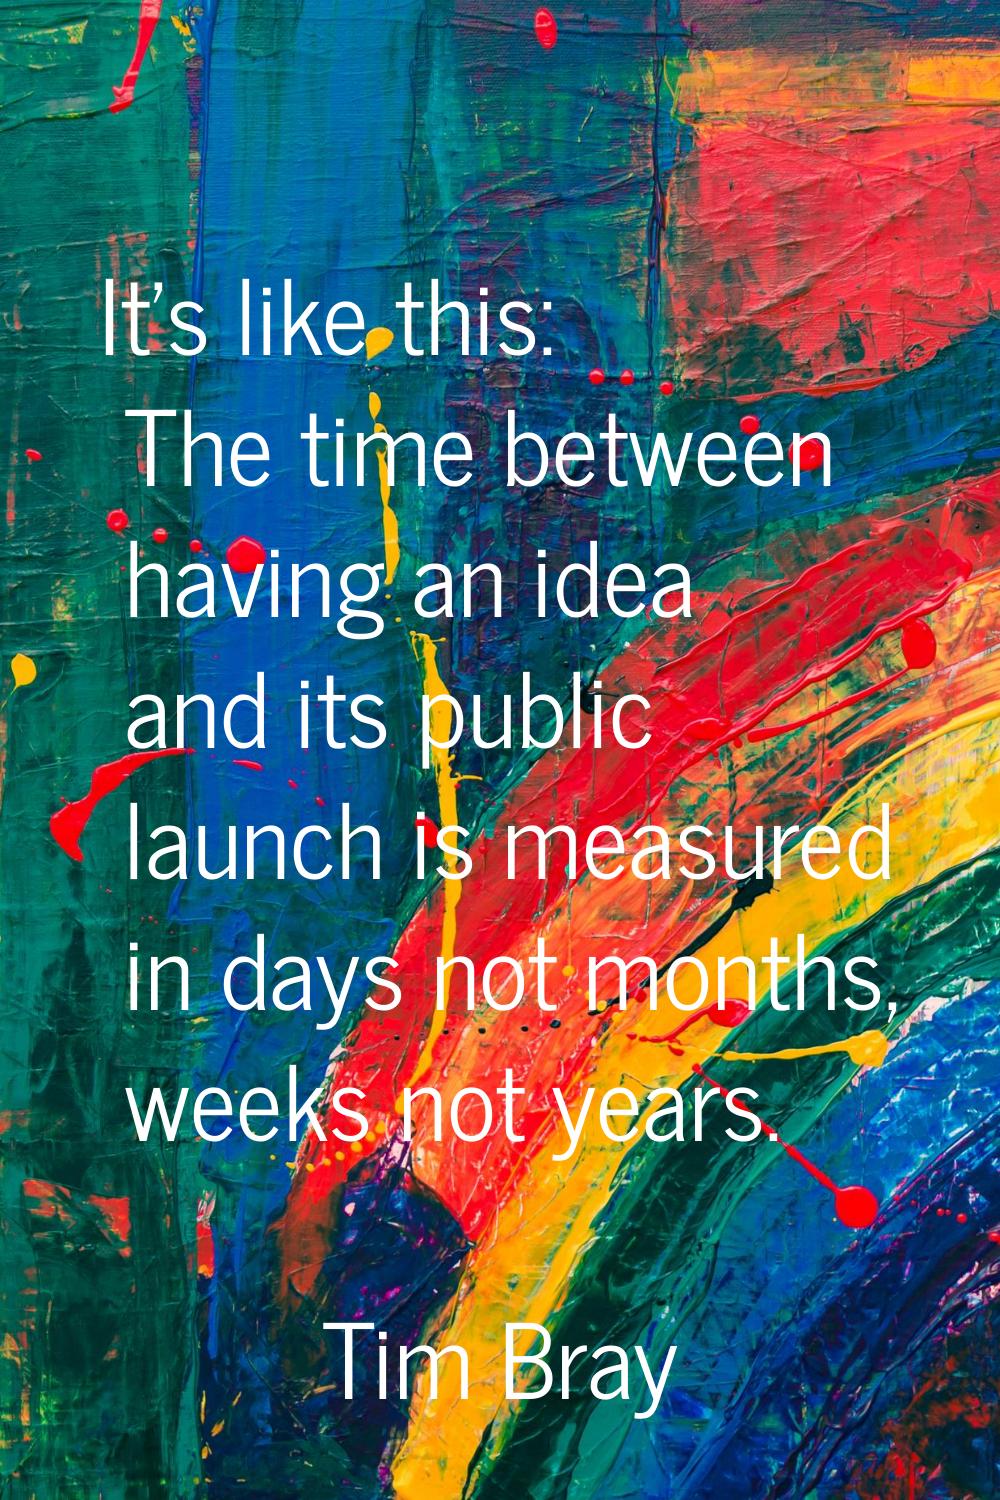 It's like this: The time between having an idea and its public launch is measured in days not month